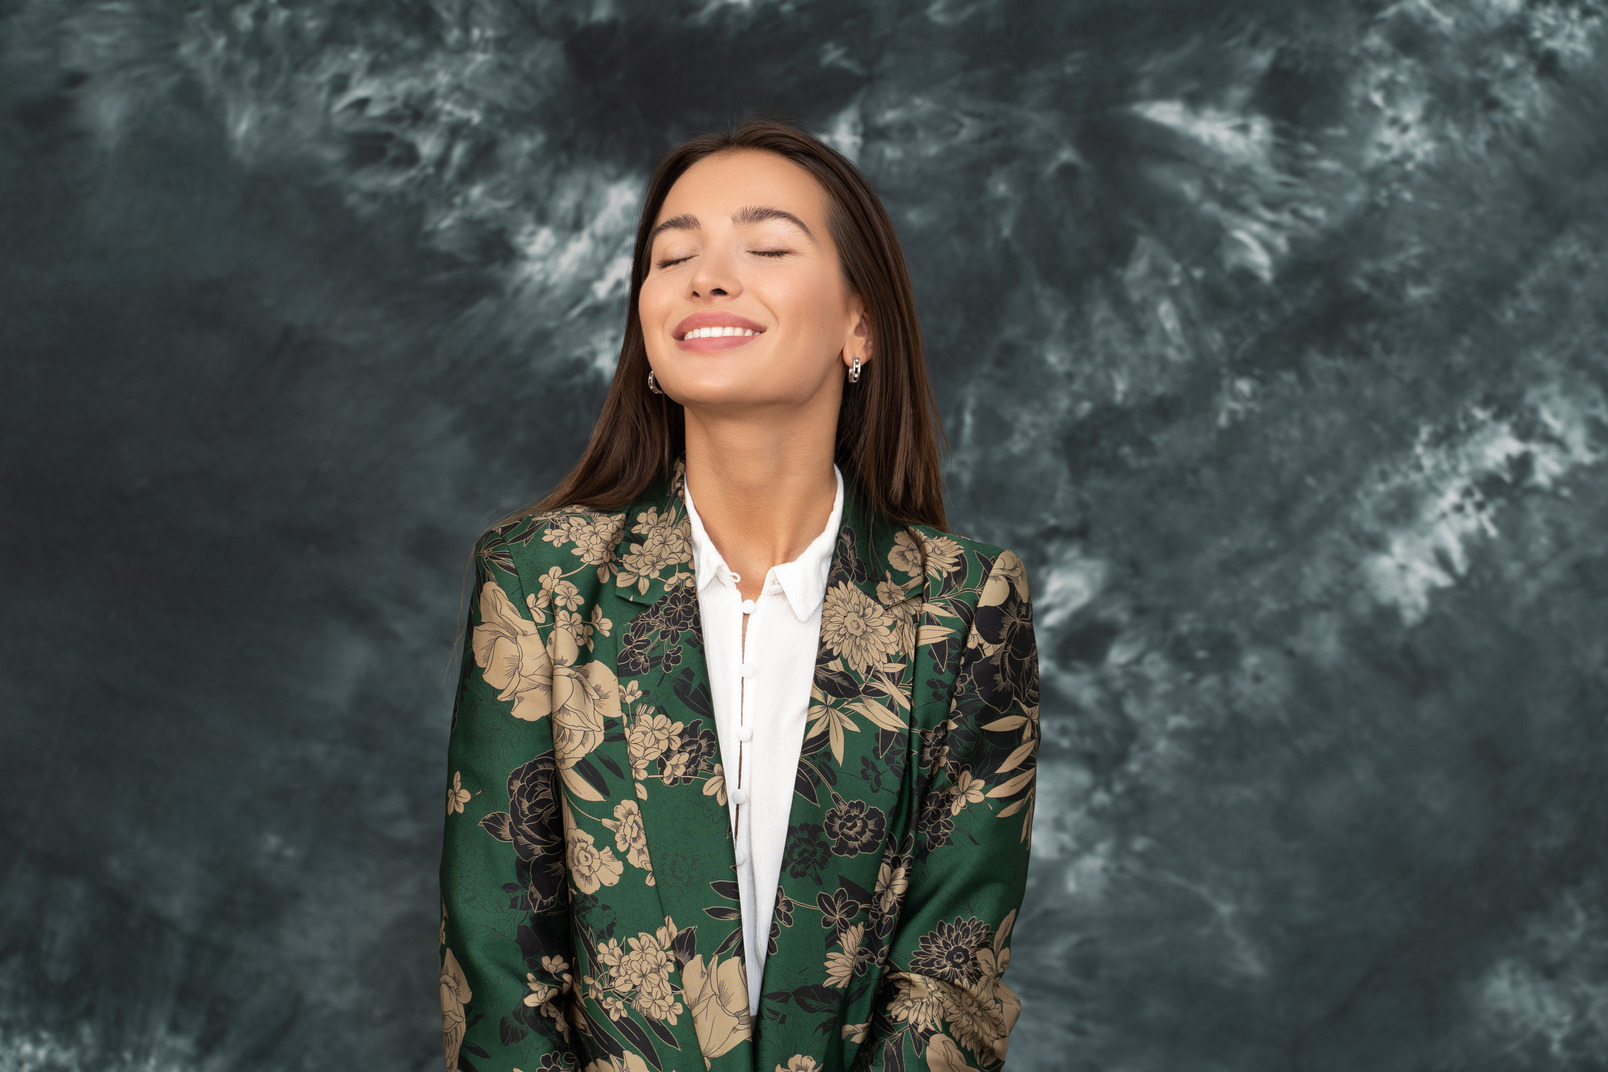 A woman in green japanese jacket smiling widely with her eyes closed